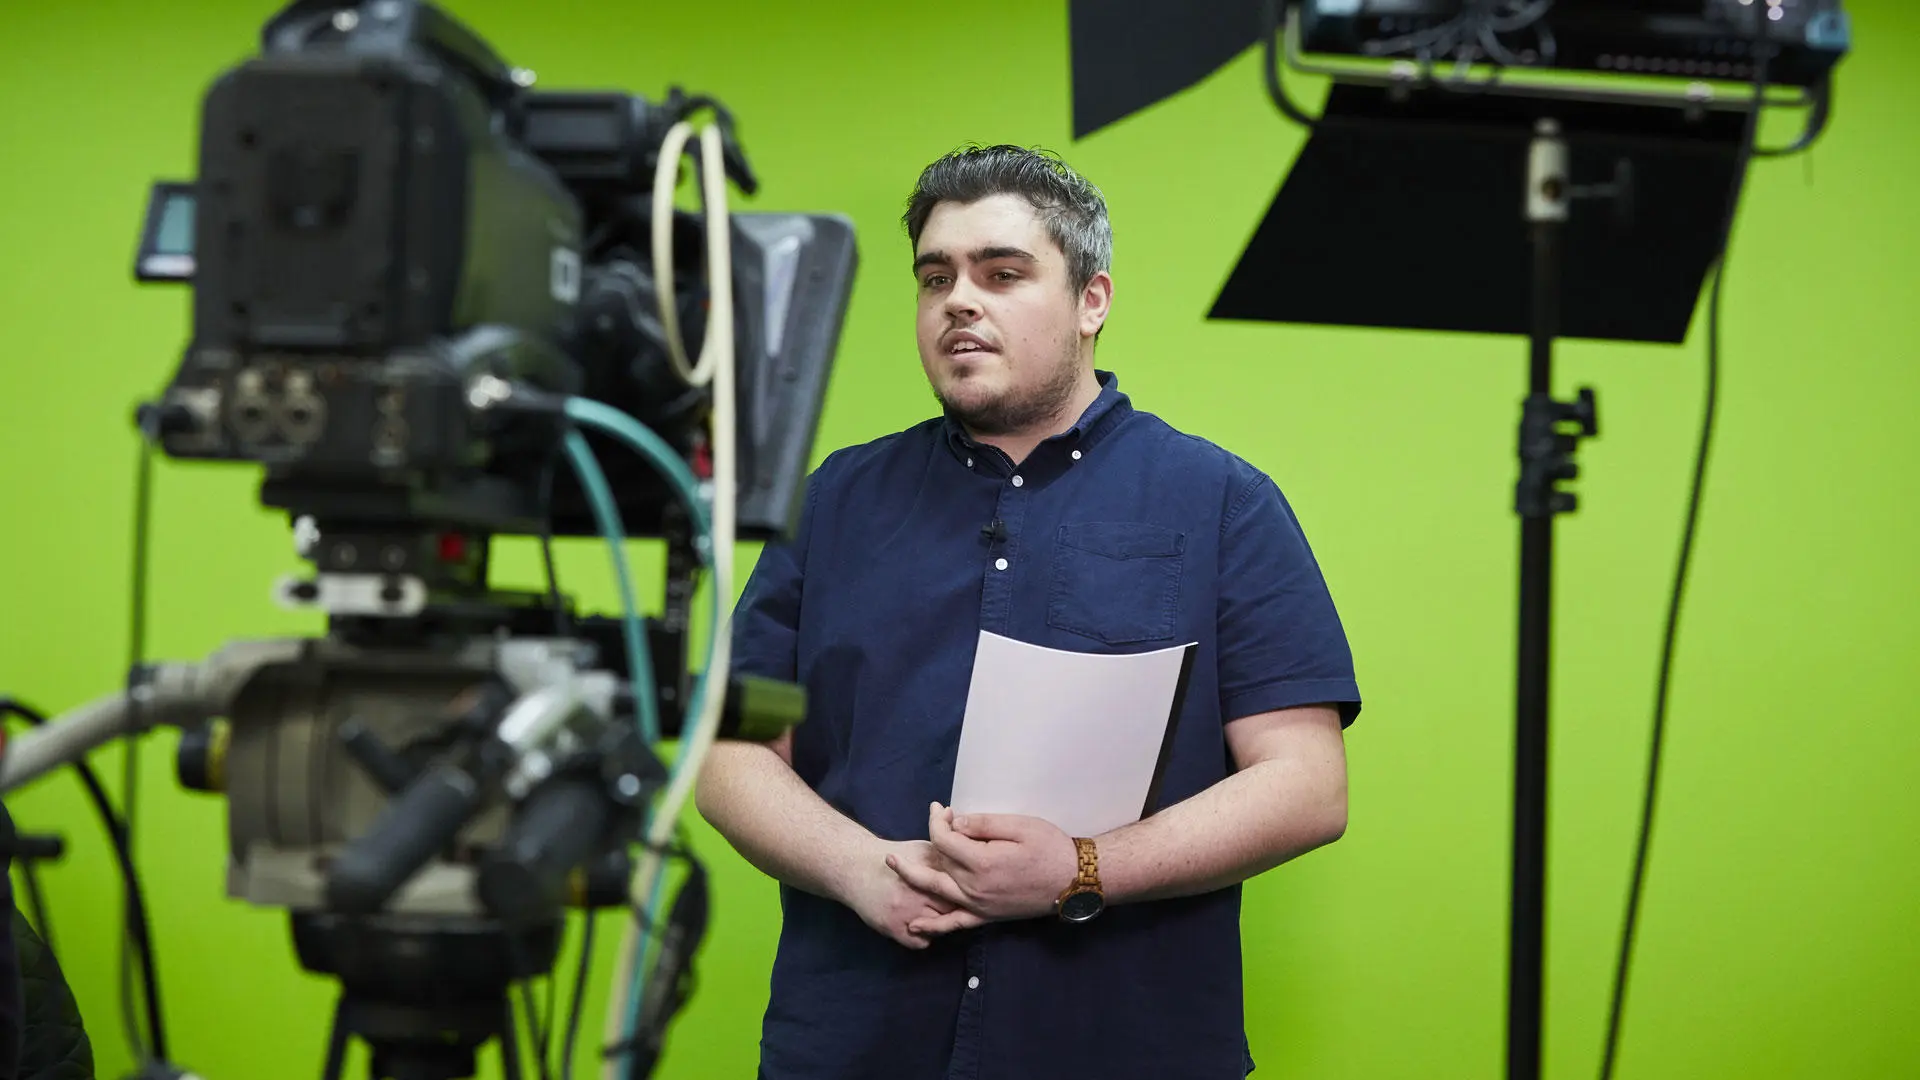 A sport journalism student standing in front of a green screen